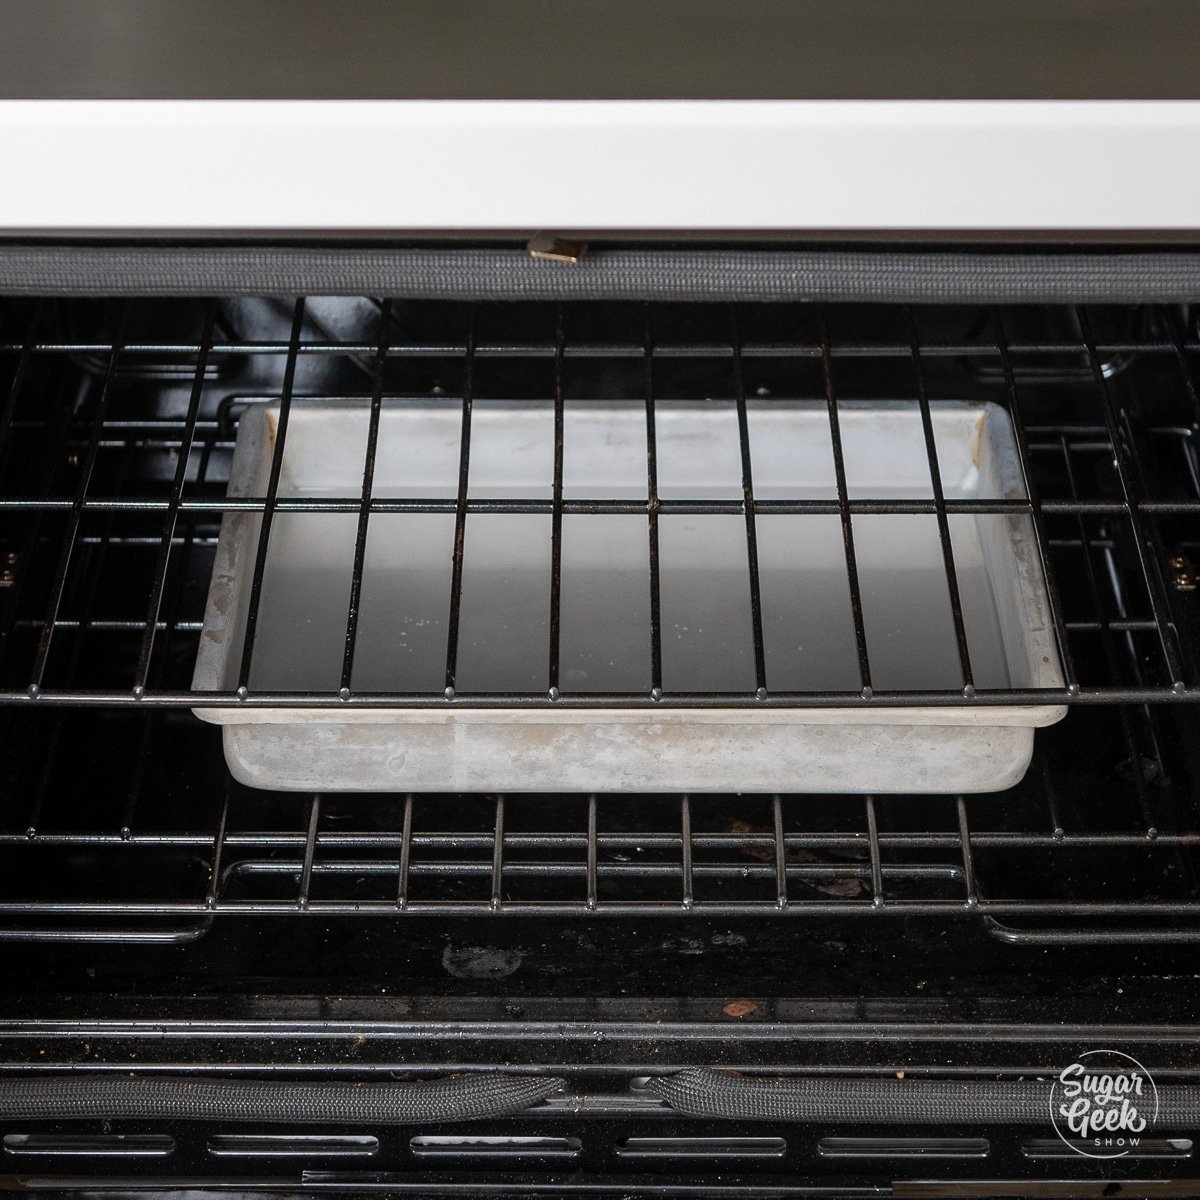 A rectangular cake pan full of water on the bottom rack of an oven